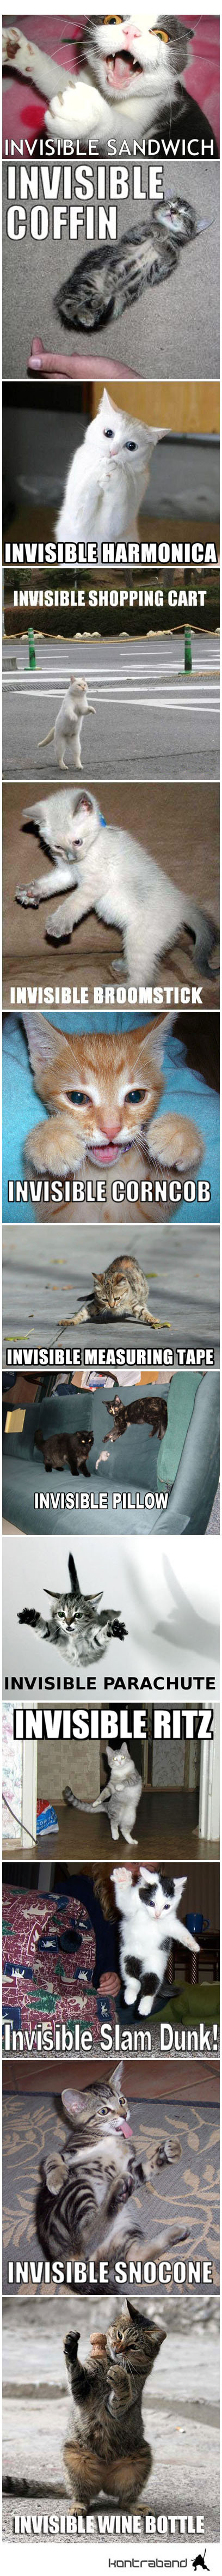 invisible cats